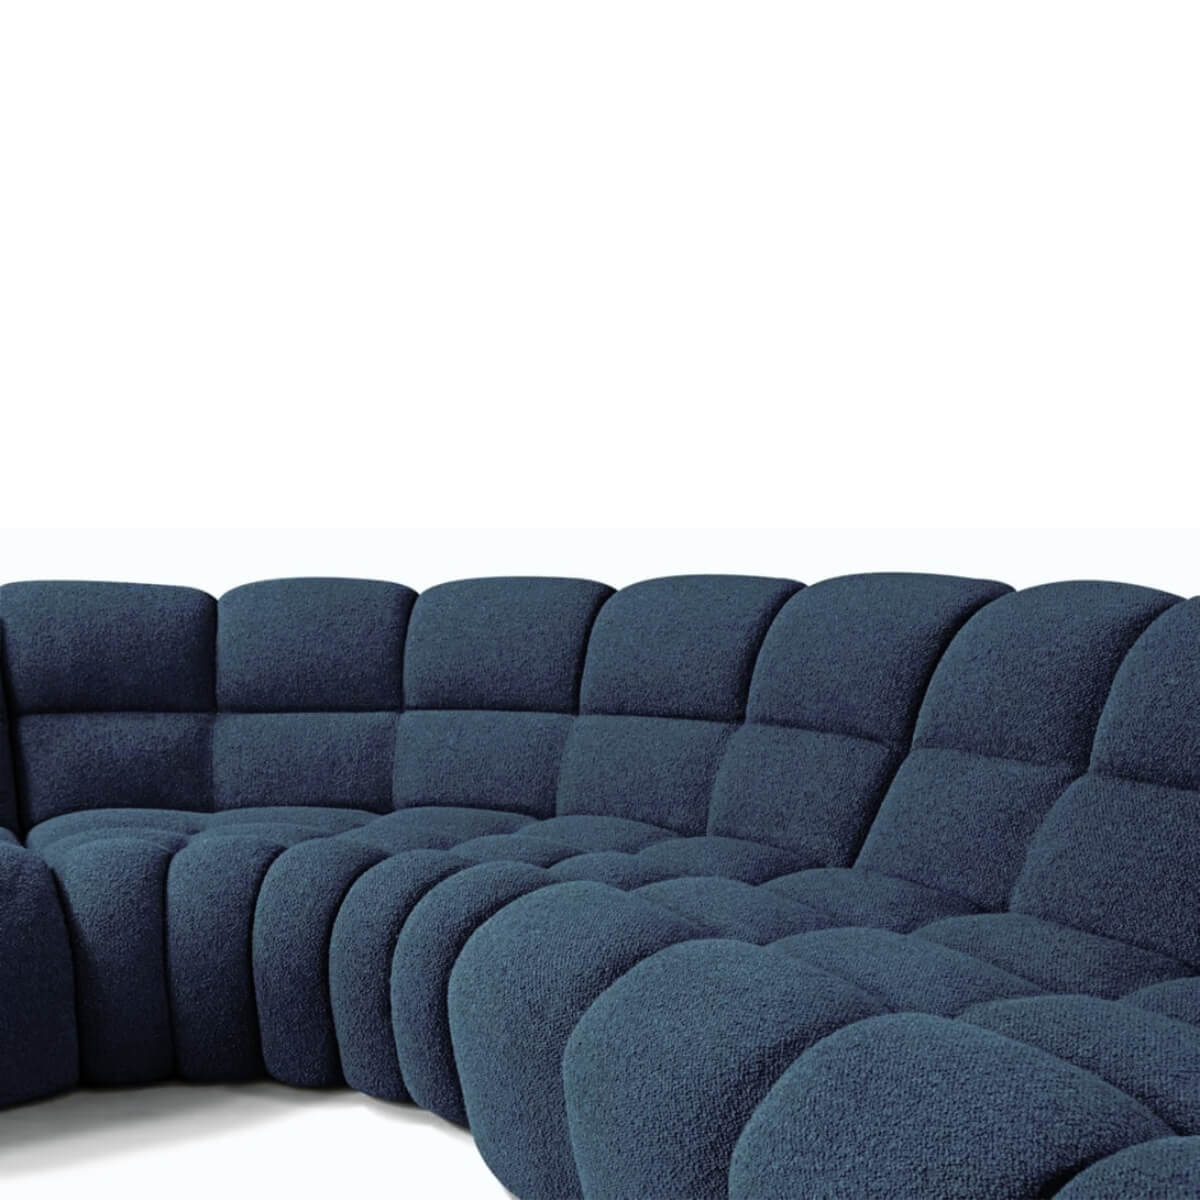 GentleGlide Teddy Fabric Sofa: A Cloud of Comfort in Your Home